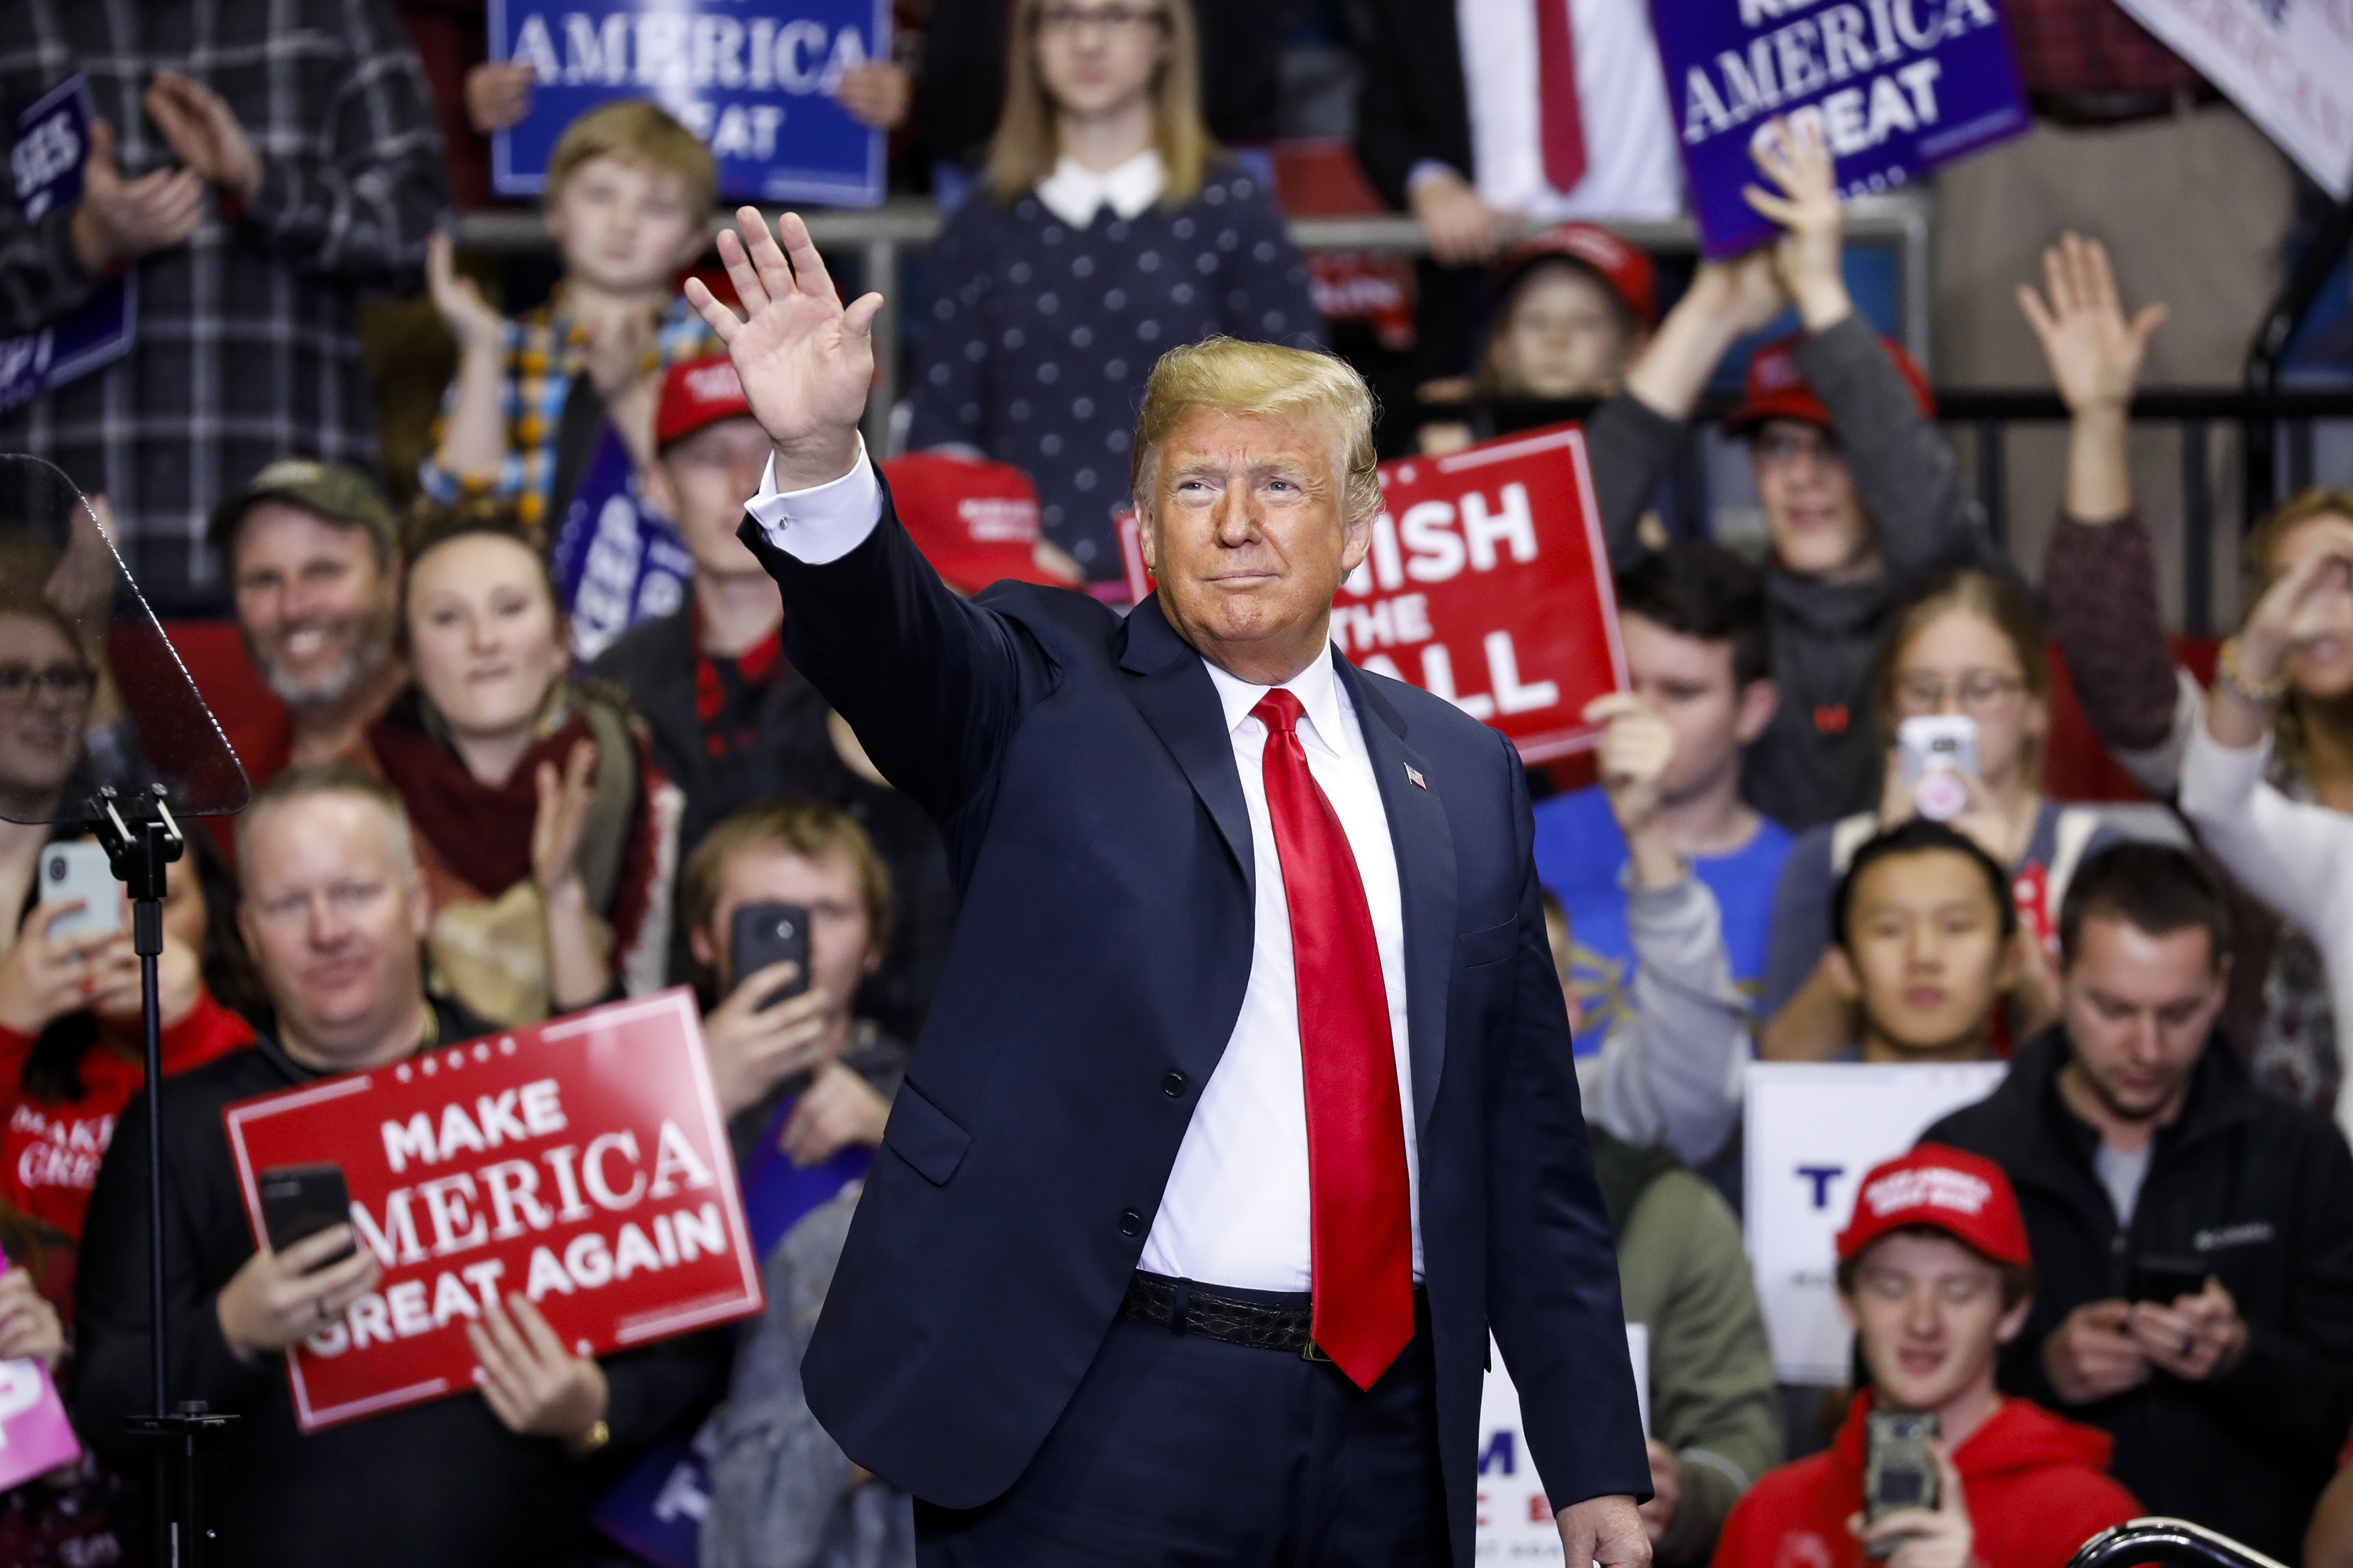 FORT WAYNE, IN - NOVEMBER 05: U.S. President Donald Trump arrives at a campaign rally for Republican Senate candidate Mike Braun at the County War Memorial Coliseum November 5, 2018 in Fort Wayne, Indiana. Braun is facing first-term Sen. Joe Donnelly (D-IN) in tomorrow's midterm election. Trump is campaigning nationwide in an effort to bolster GOP prospects. (Photo by Aaron P. Bernstein/Getty Images)